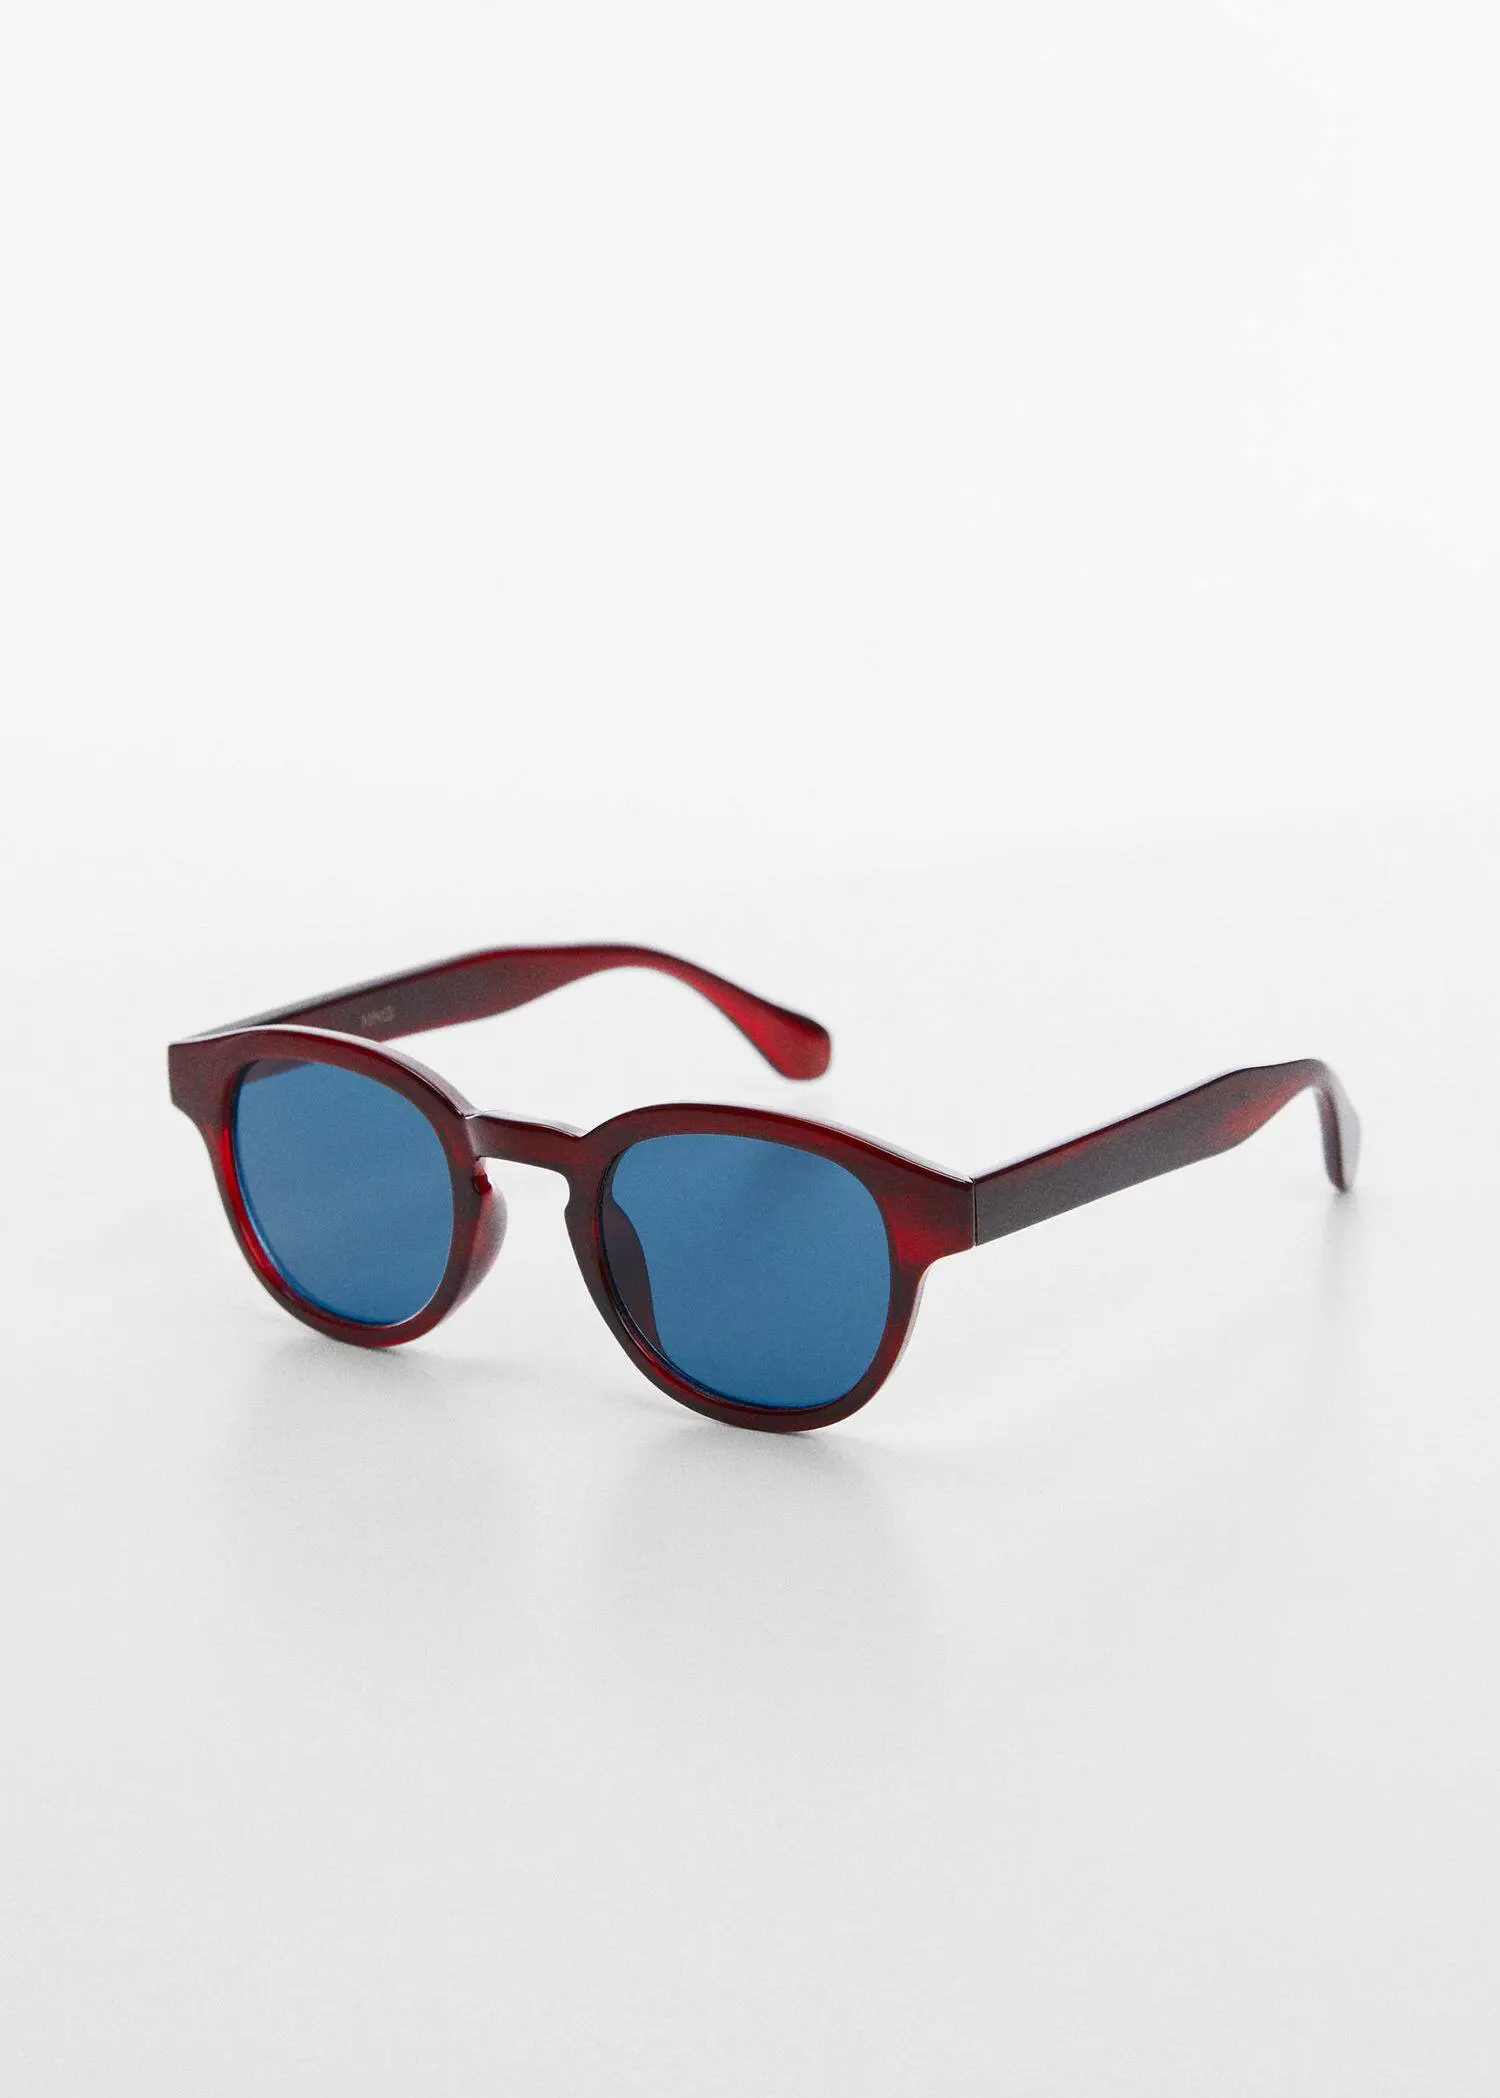 Mango Rounded sunglasses. a pair of red sunglasses on a white surface. 